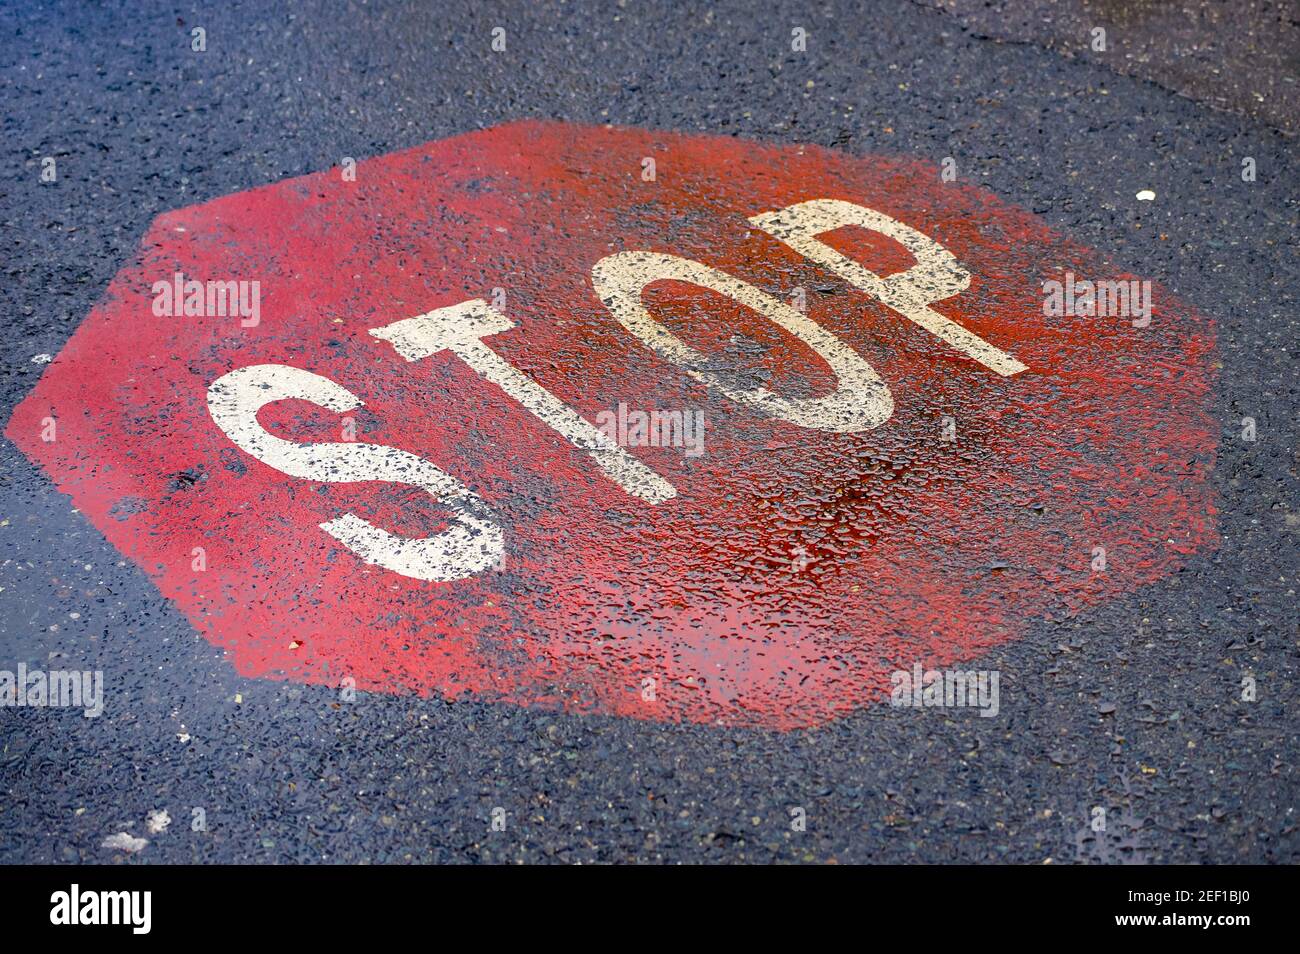 Bucharest, Romania - January 25, 2021: A stop sign painted on asphalt at the intersection of a road in Bucharest. Stock Photo